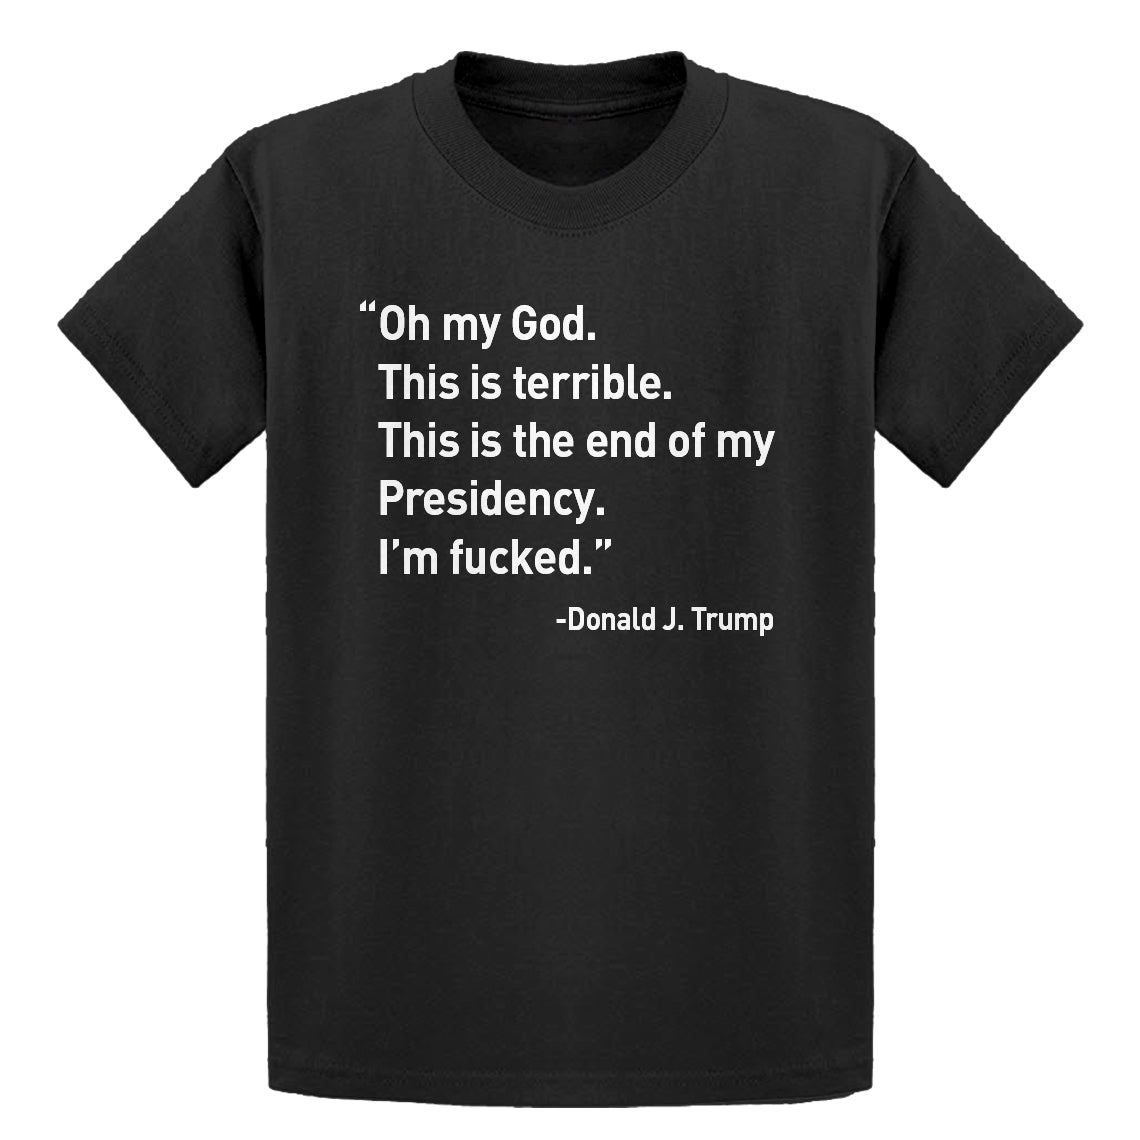 Youth This is the End of my Presidency Kids T-shirt